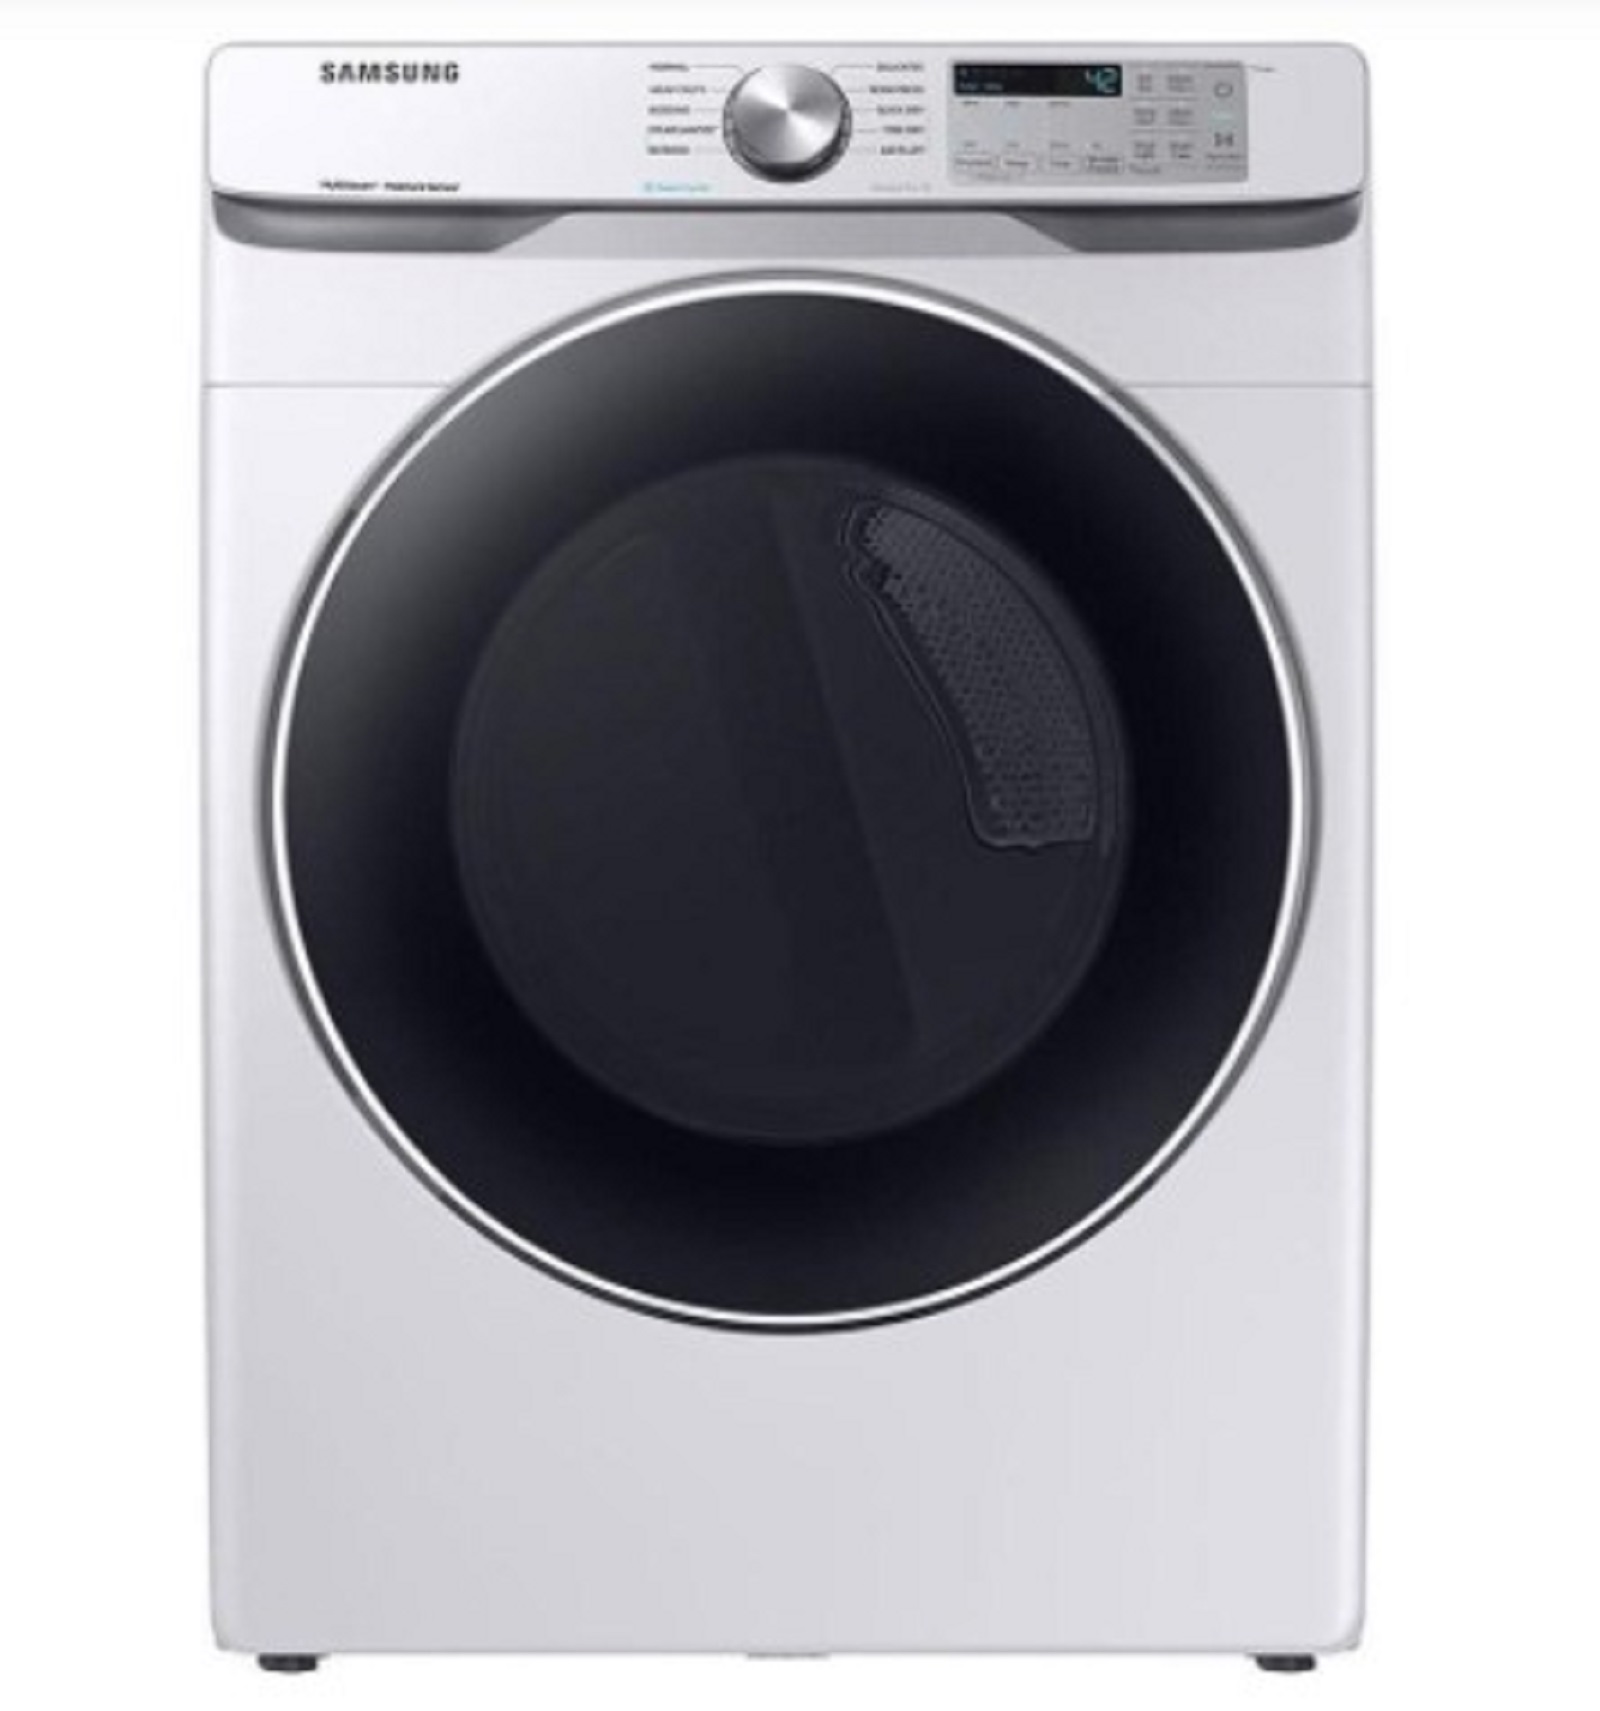 Samsung DVE45T6200W/A3 7.5 cu.ft. Electric Dryer with Steam Sanitize+